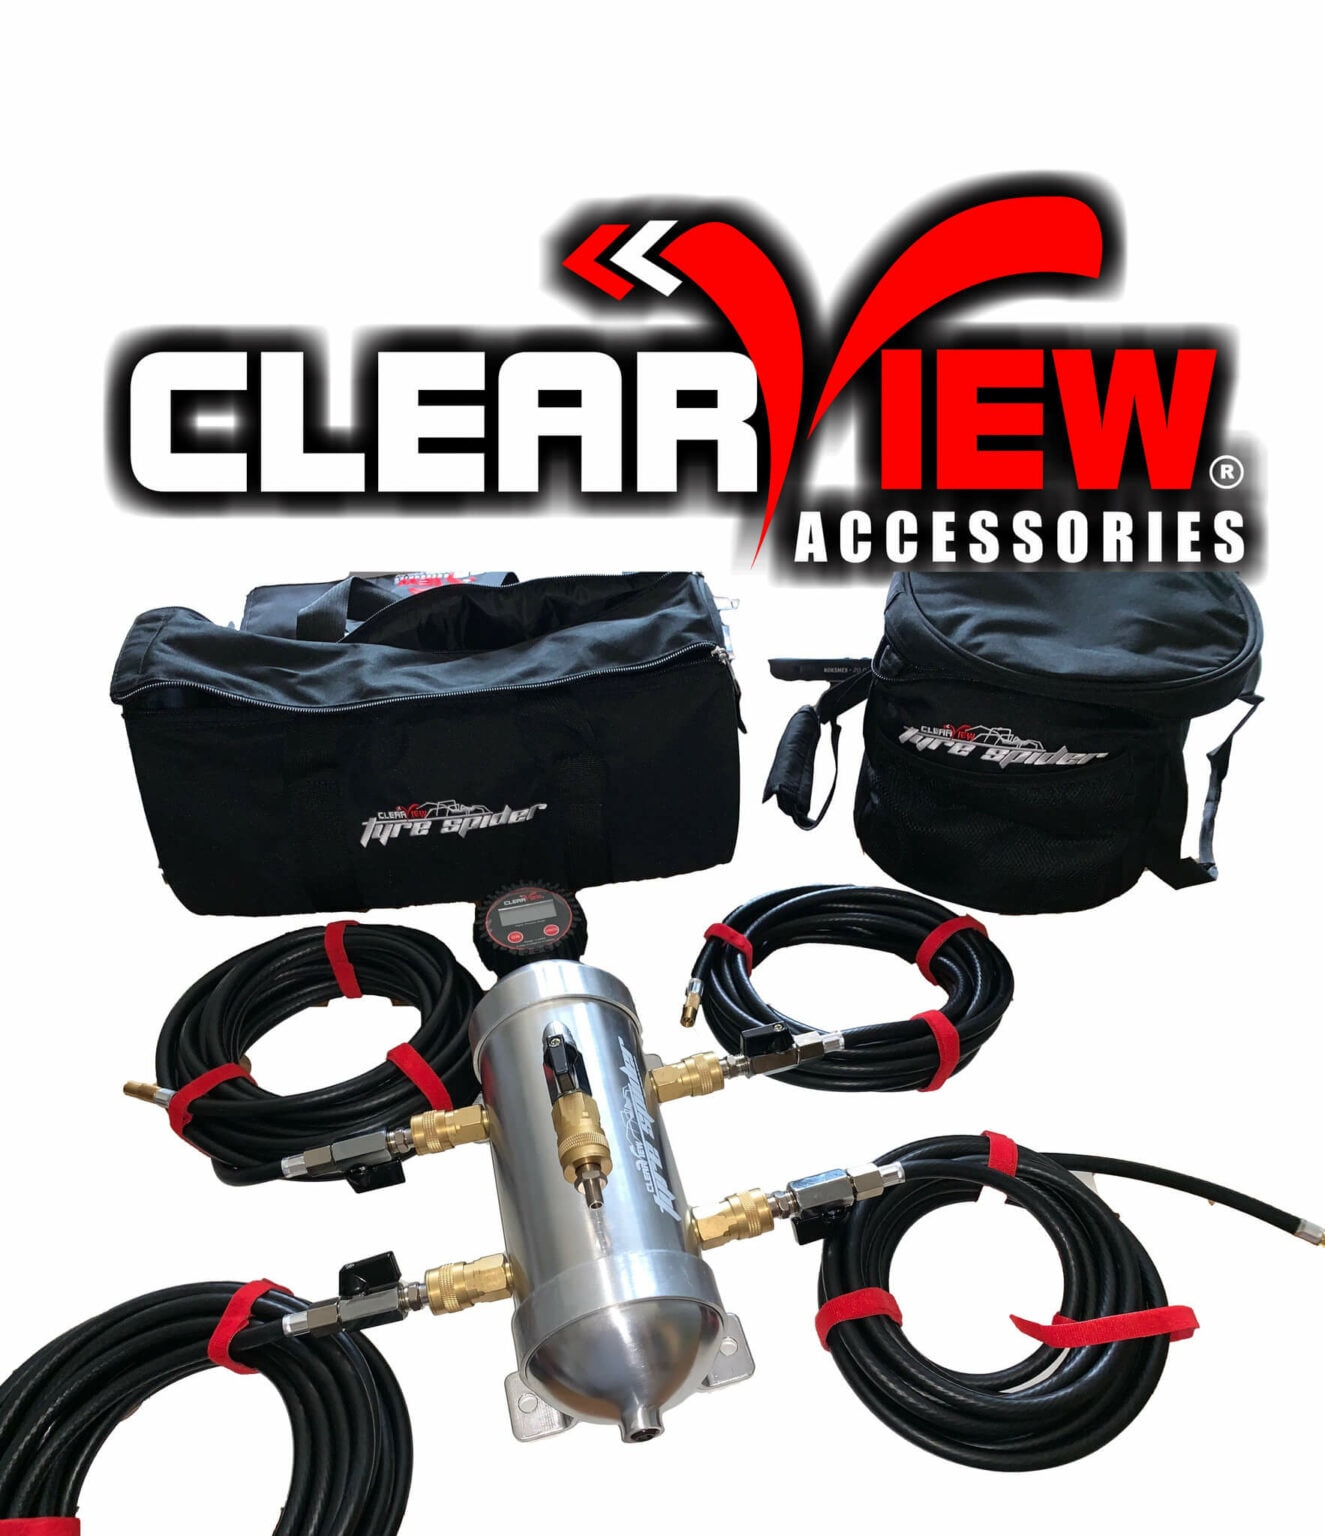 M4C | Tyre Spider - Clear View Accessories